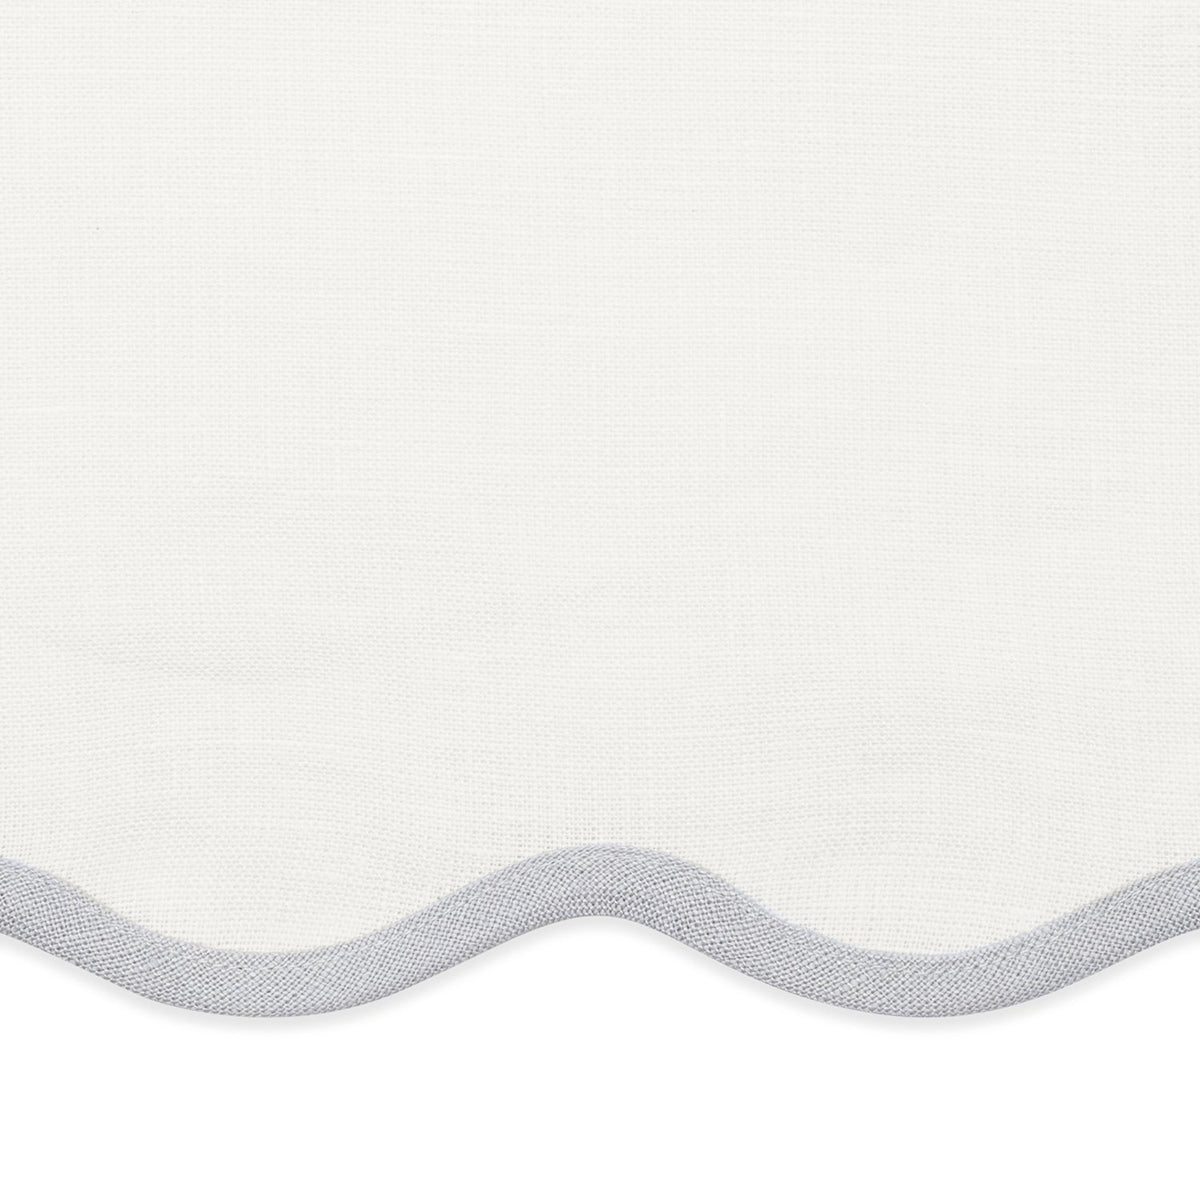 Swatch Sample of Matouk Scallop Edge Table Linens in Color Classic Grey